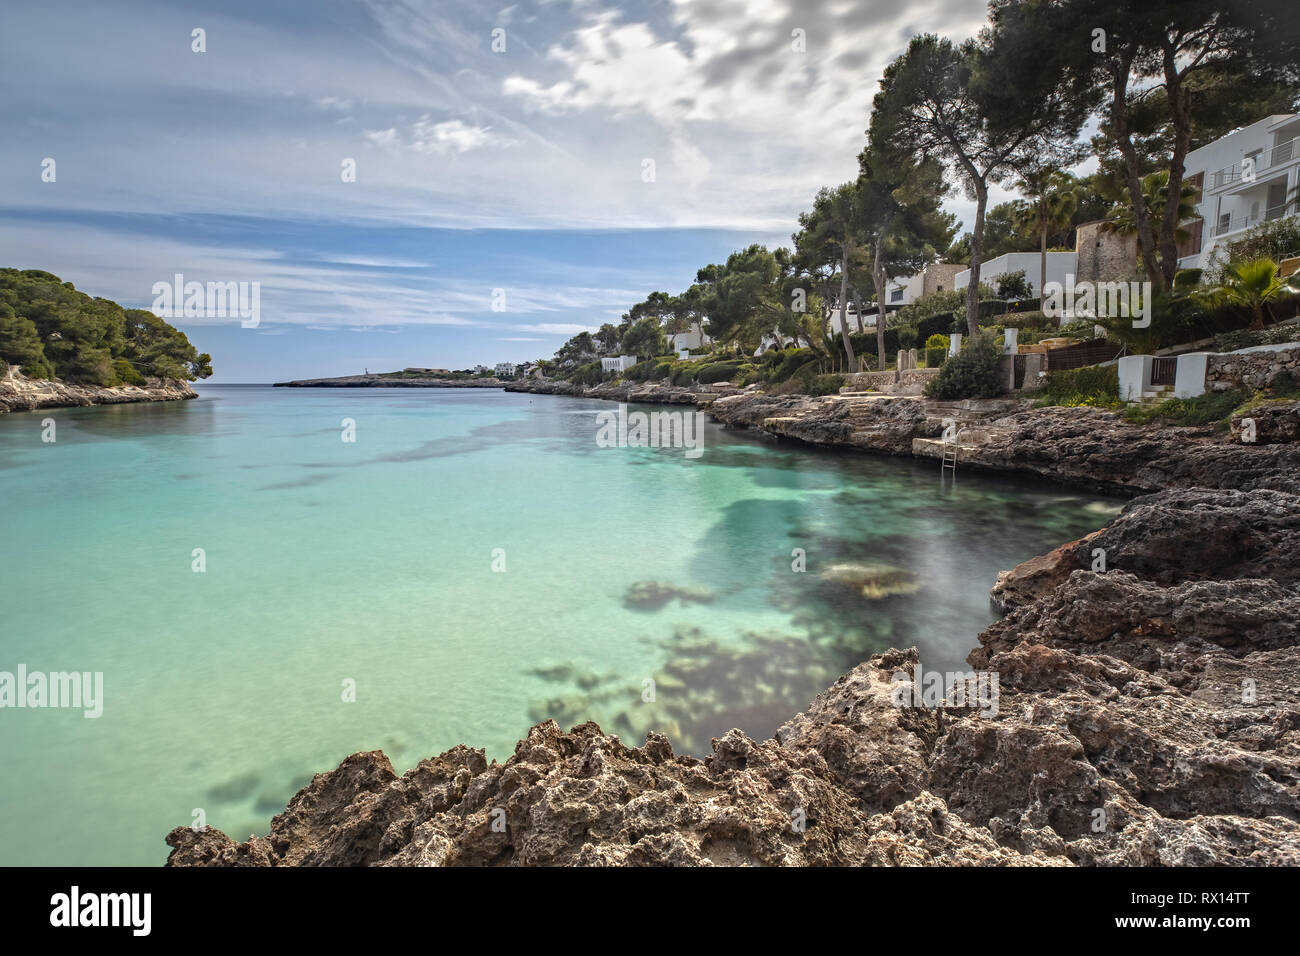 The Bay of Cala d'Or in Mallorca, Spain Stock Photo